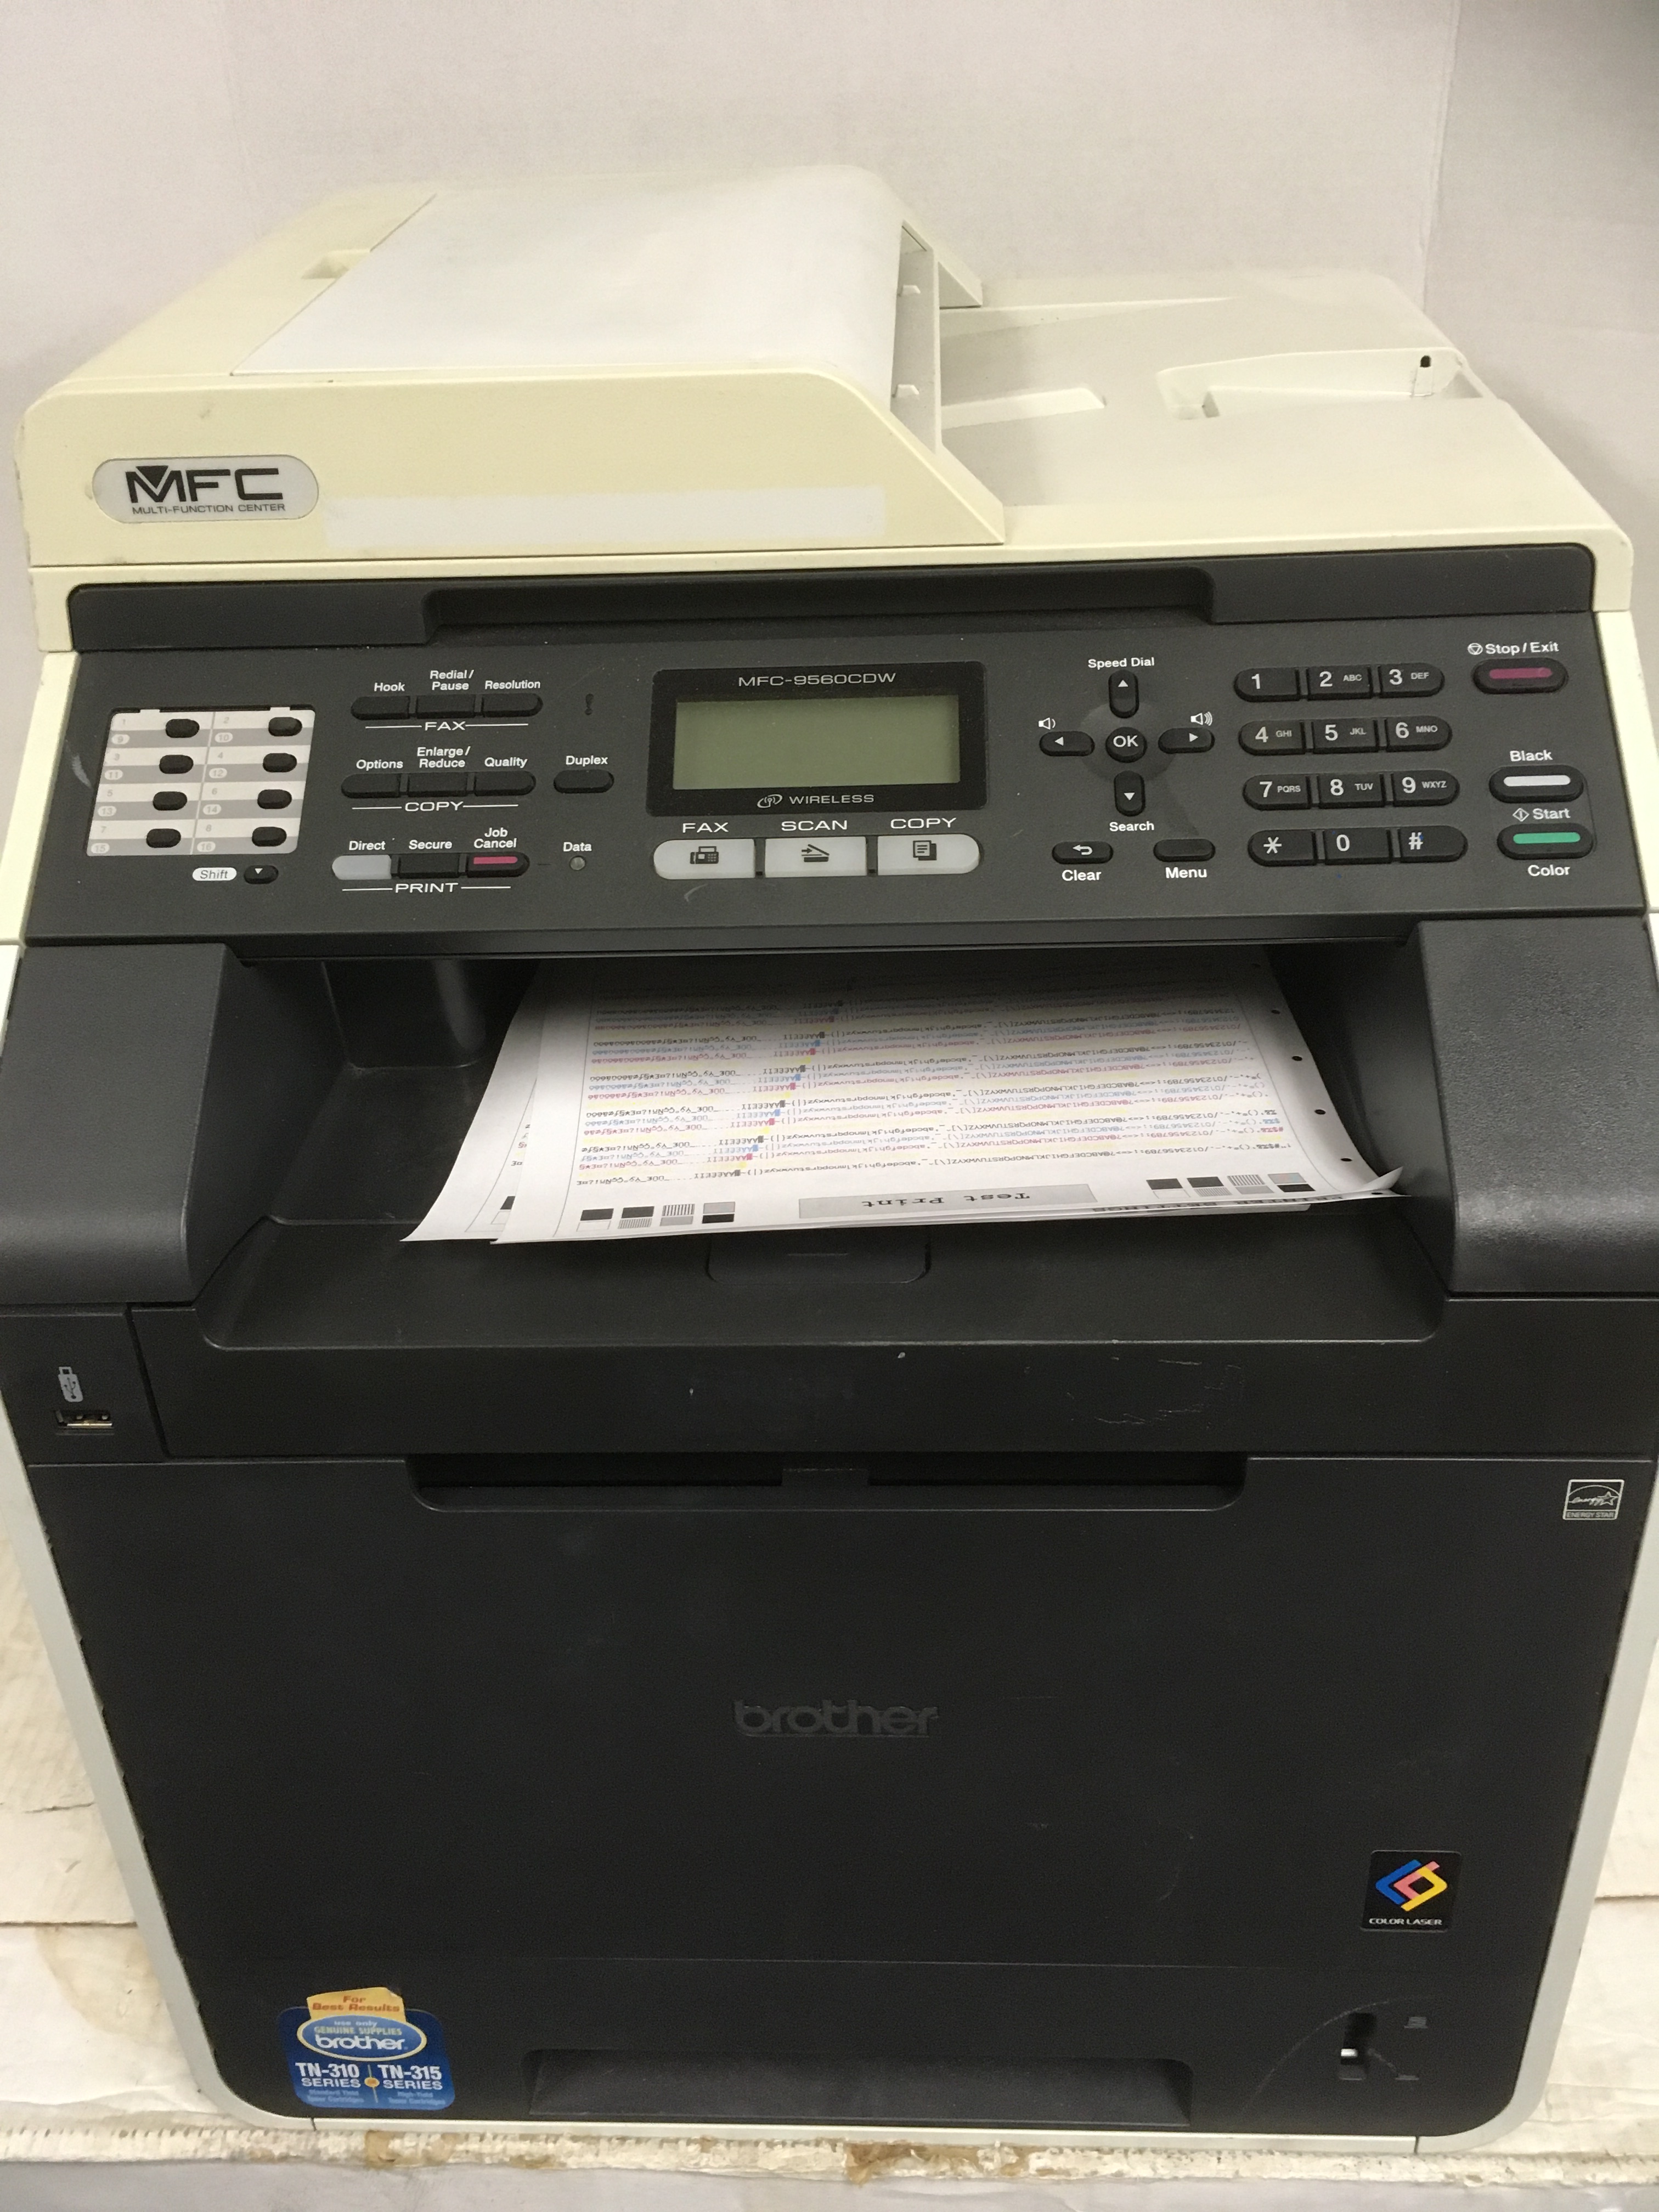 Wireless Color Brother MFC9560CDW 2 Sided Printer